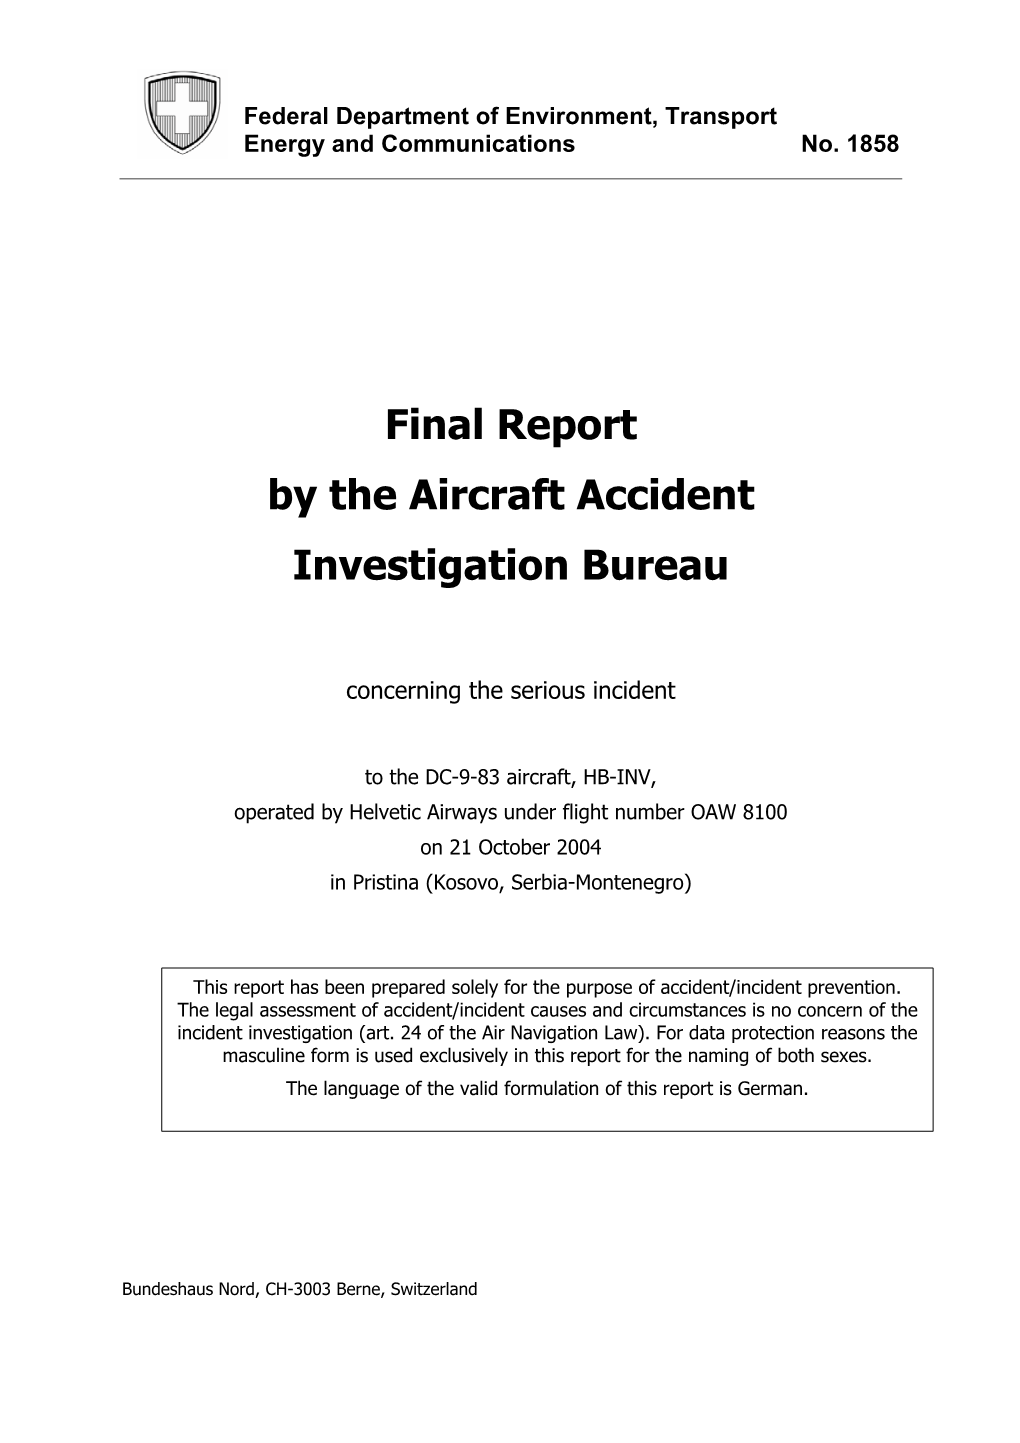 Final Report by the Aircraft Accident Investigation Bureau